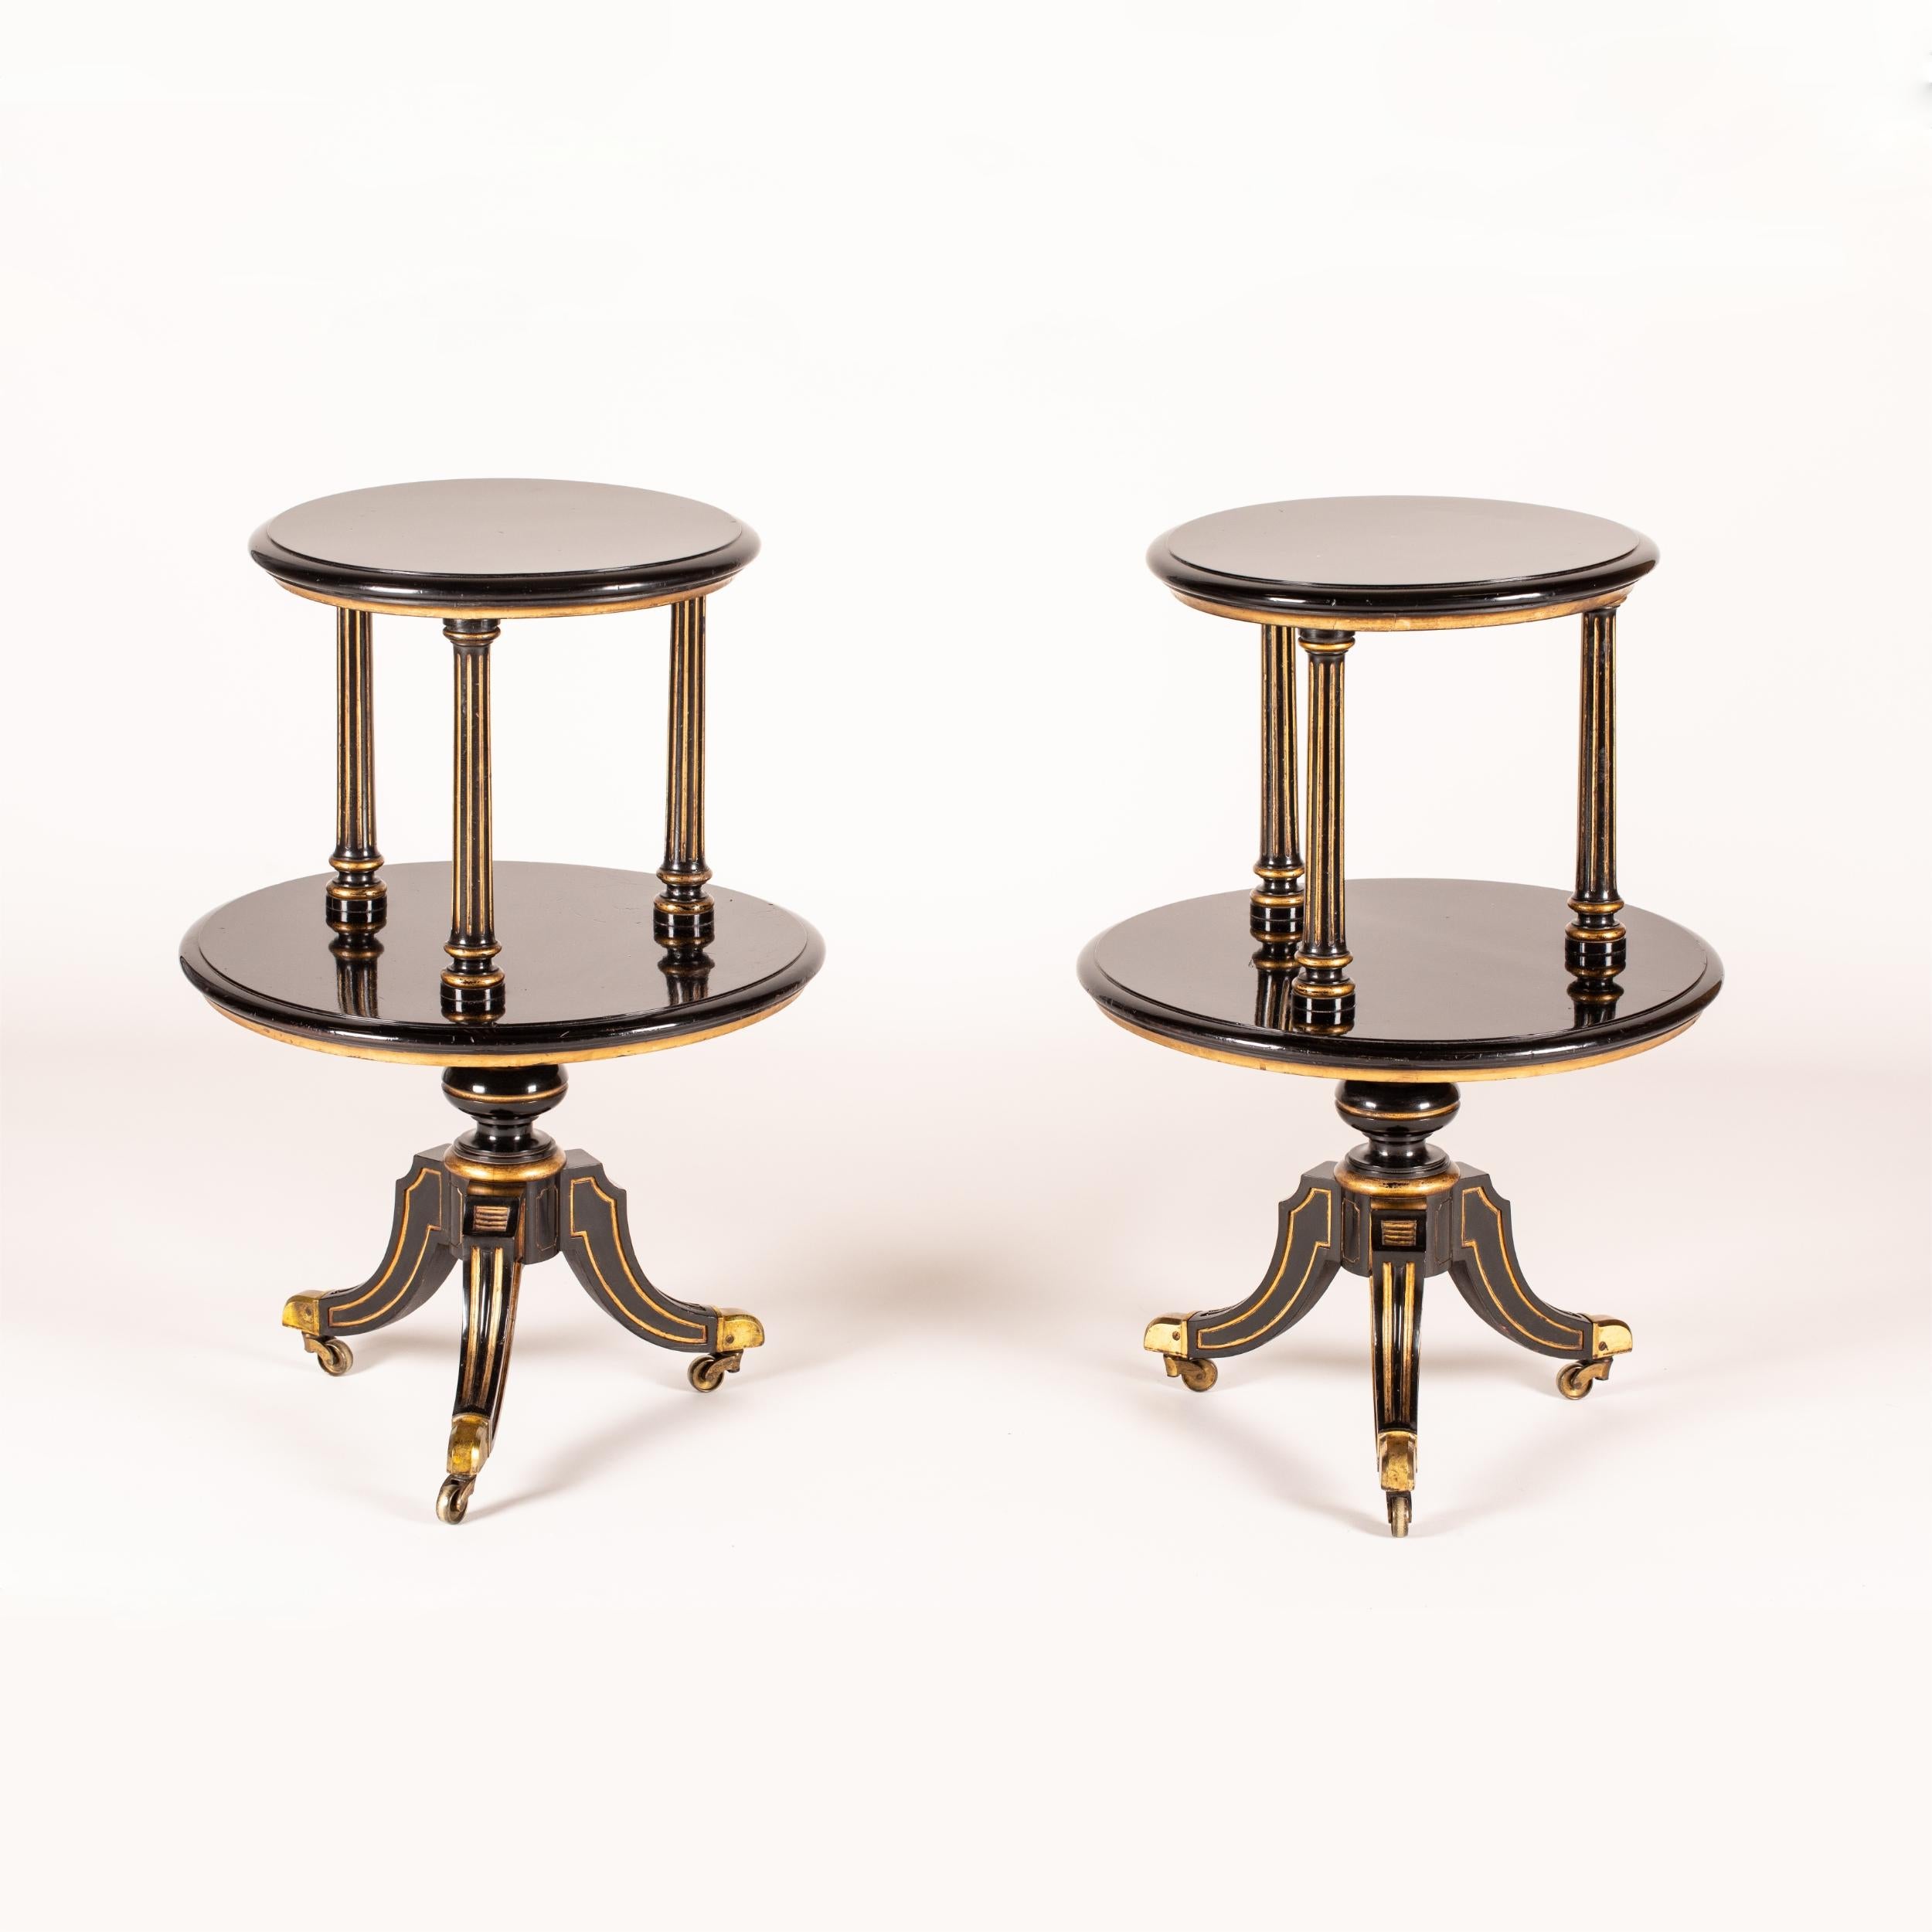 English Rare 19th Century Pair of Black Lacquered Aesthetic Movement Étagère Tables For Sale